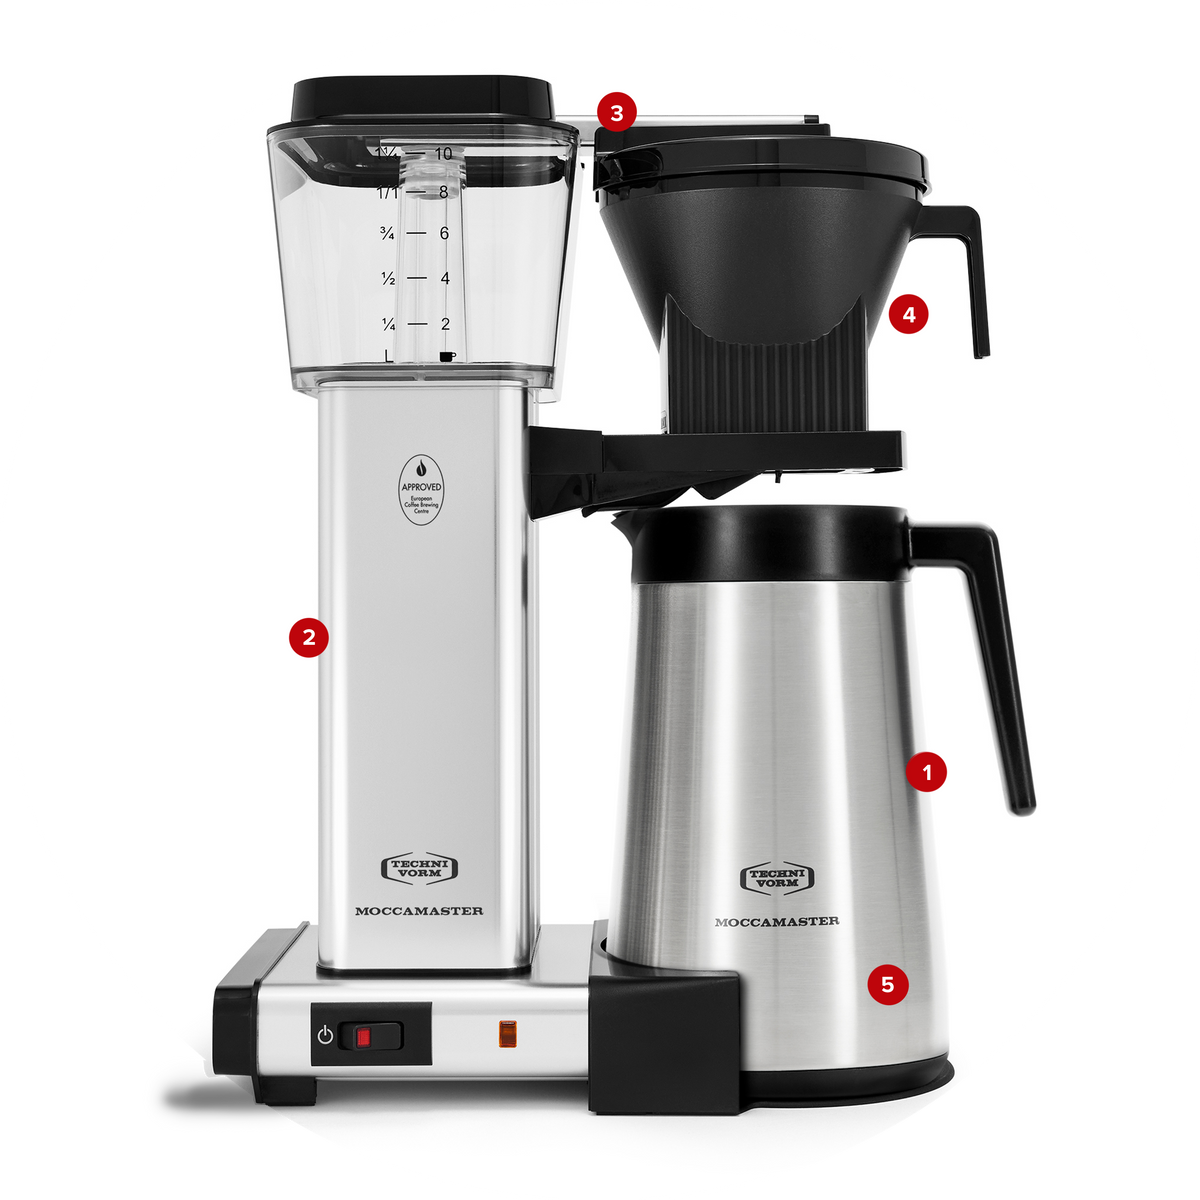 Maker: Moccamaster Pour Moccamaster - Brewer Automatic Drip-Stop USA KBGT Coffee Over